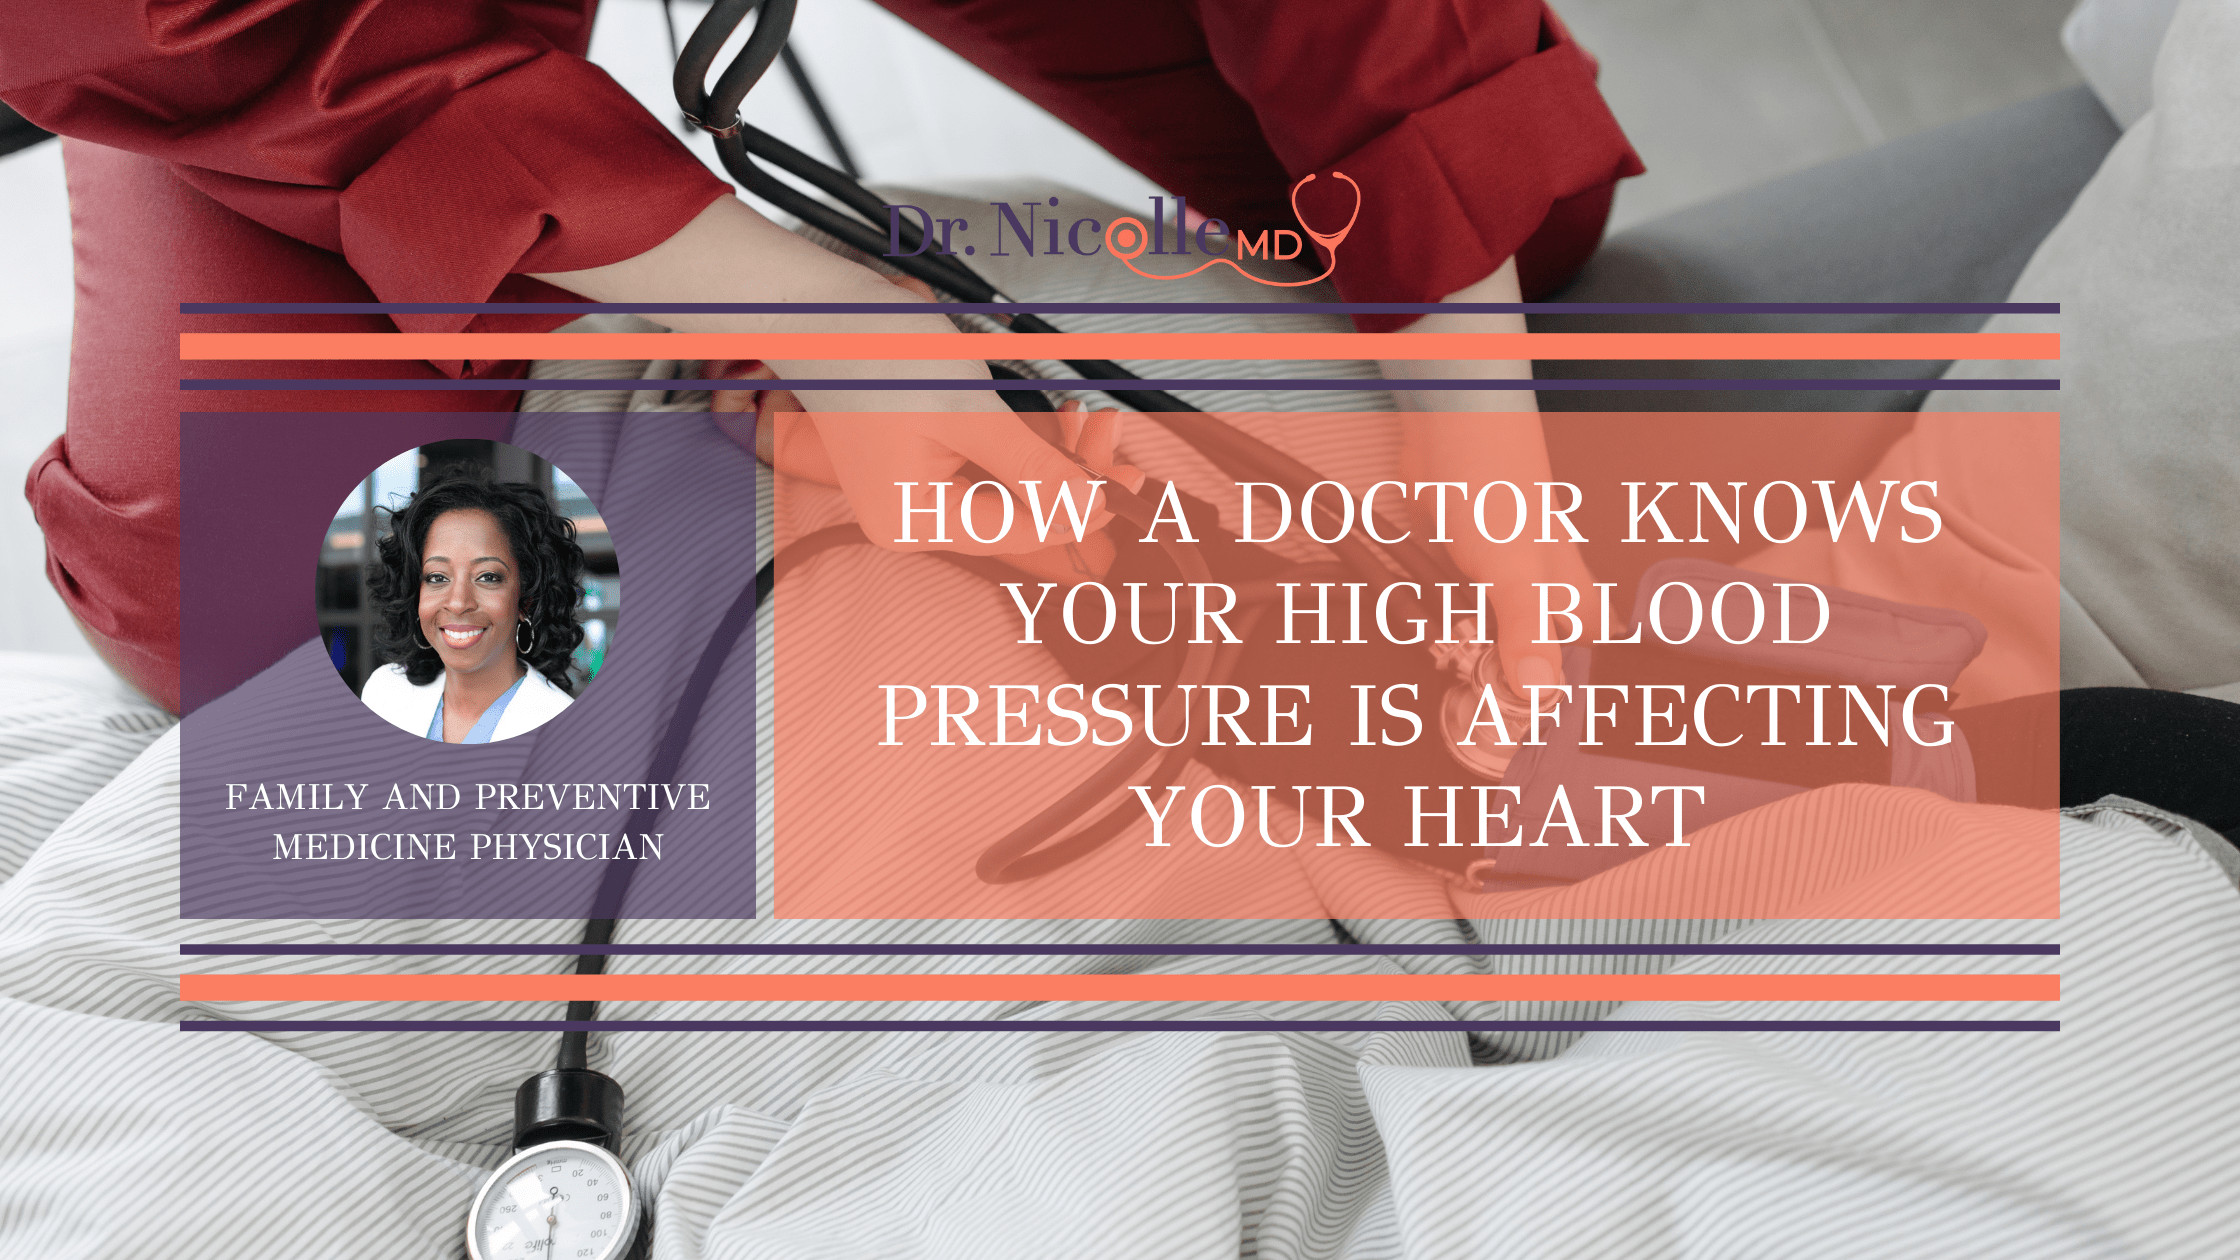 11How A Doctor Knows Your High Blood Pressure Is Affecting Your Heart